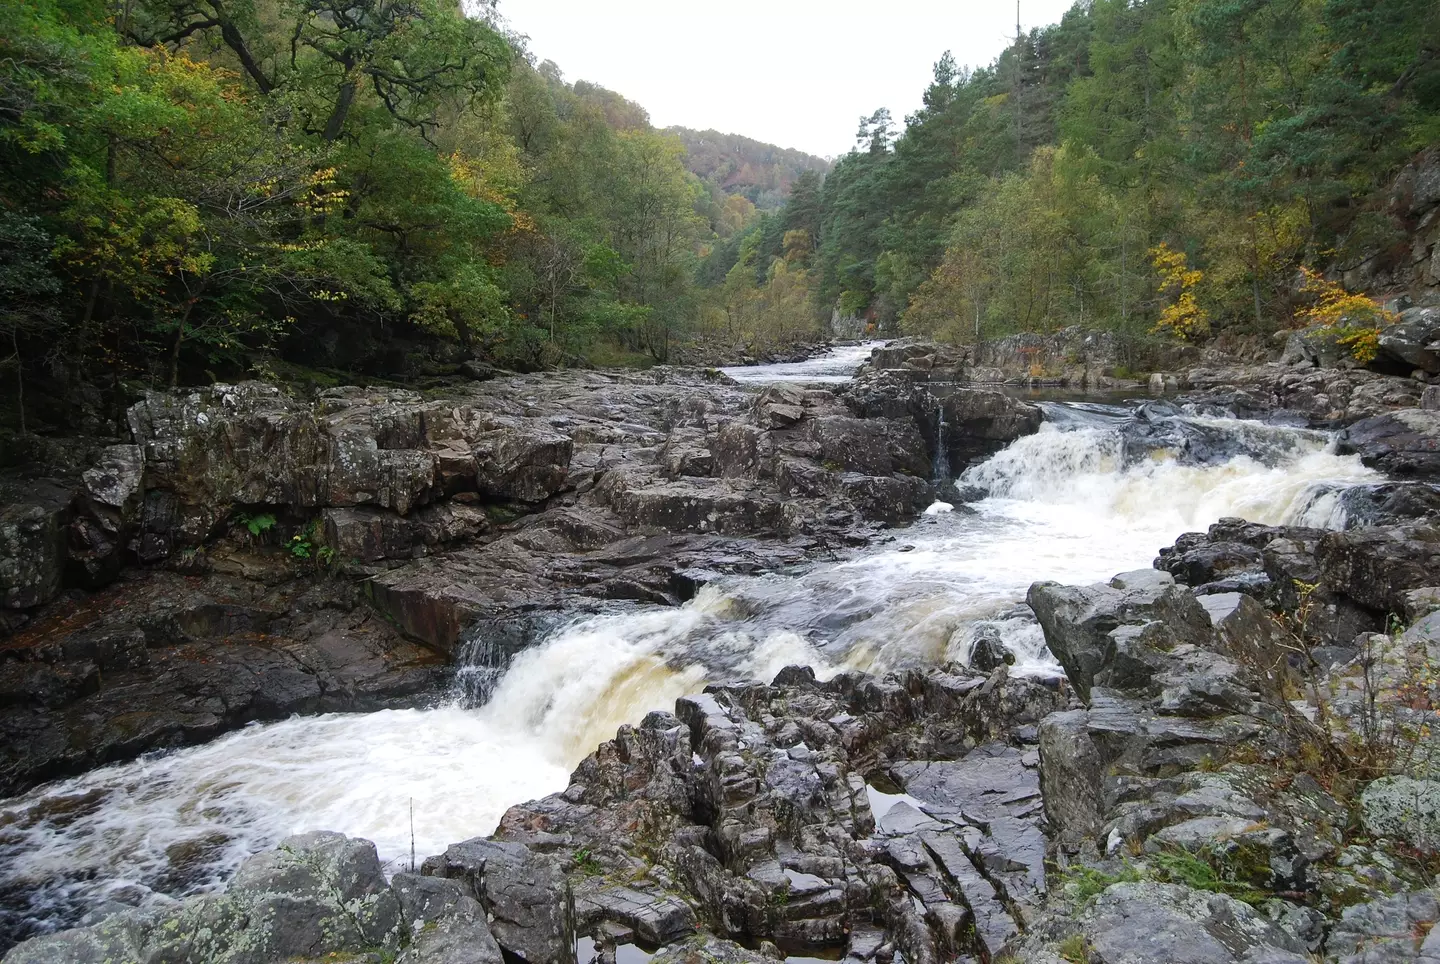 The students were believed to be at the Linn of Tummel waterfall. (alanfin/Getty Images)